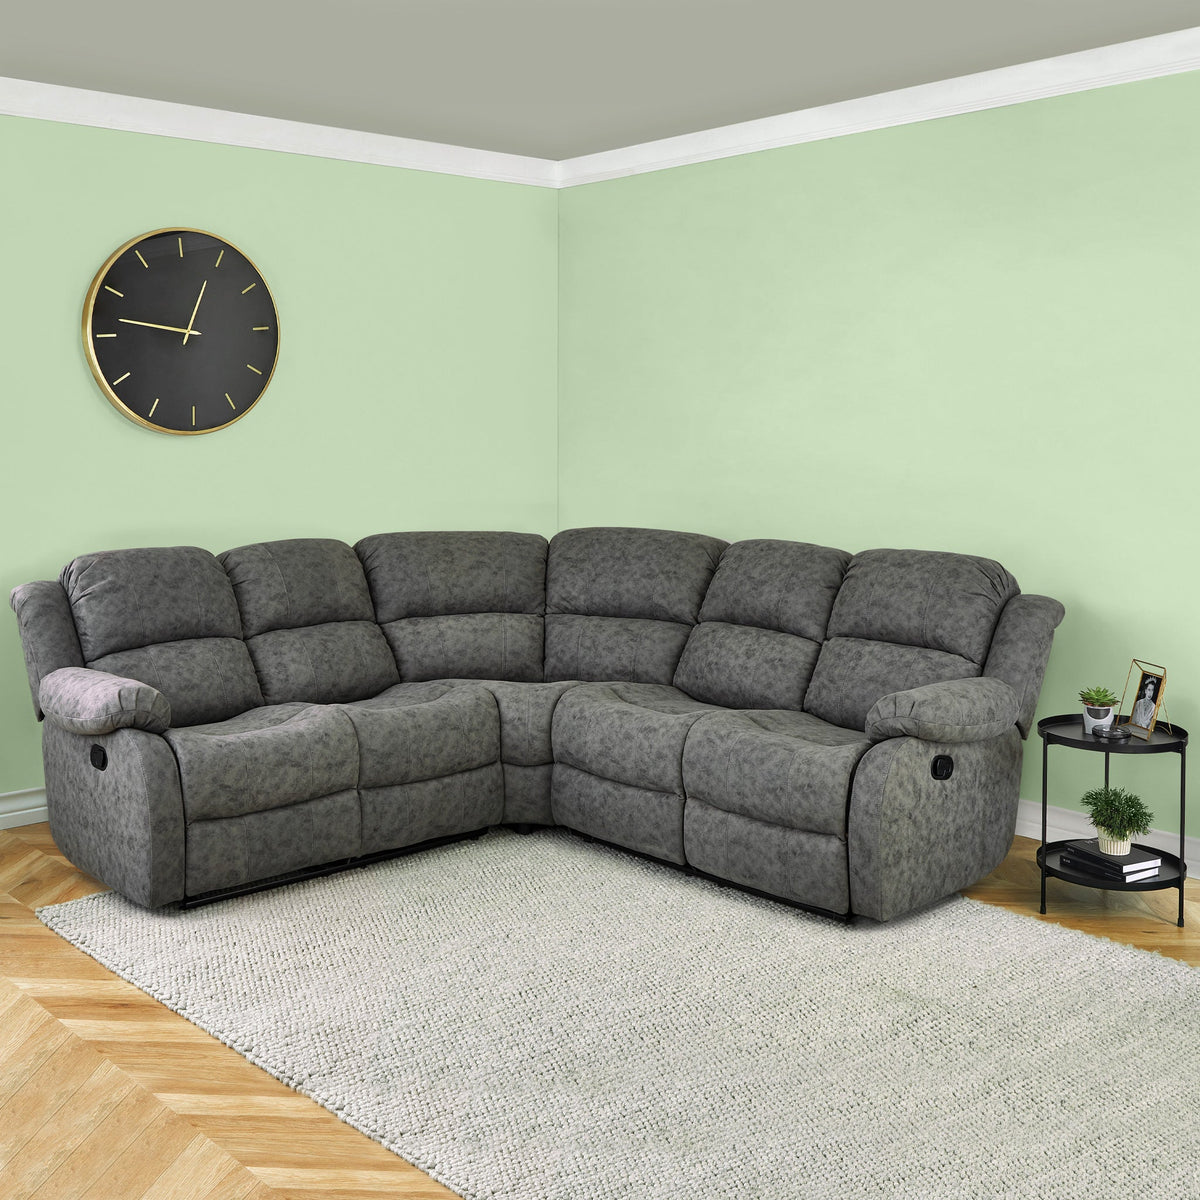 Anton Charcoal Zonica Leather Reclining Corner Sofa for living room